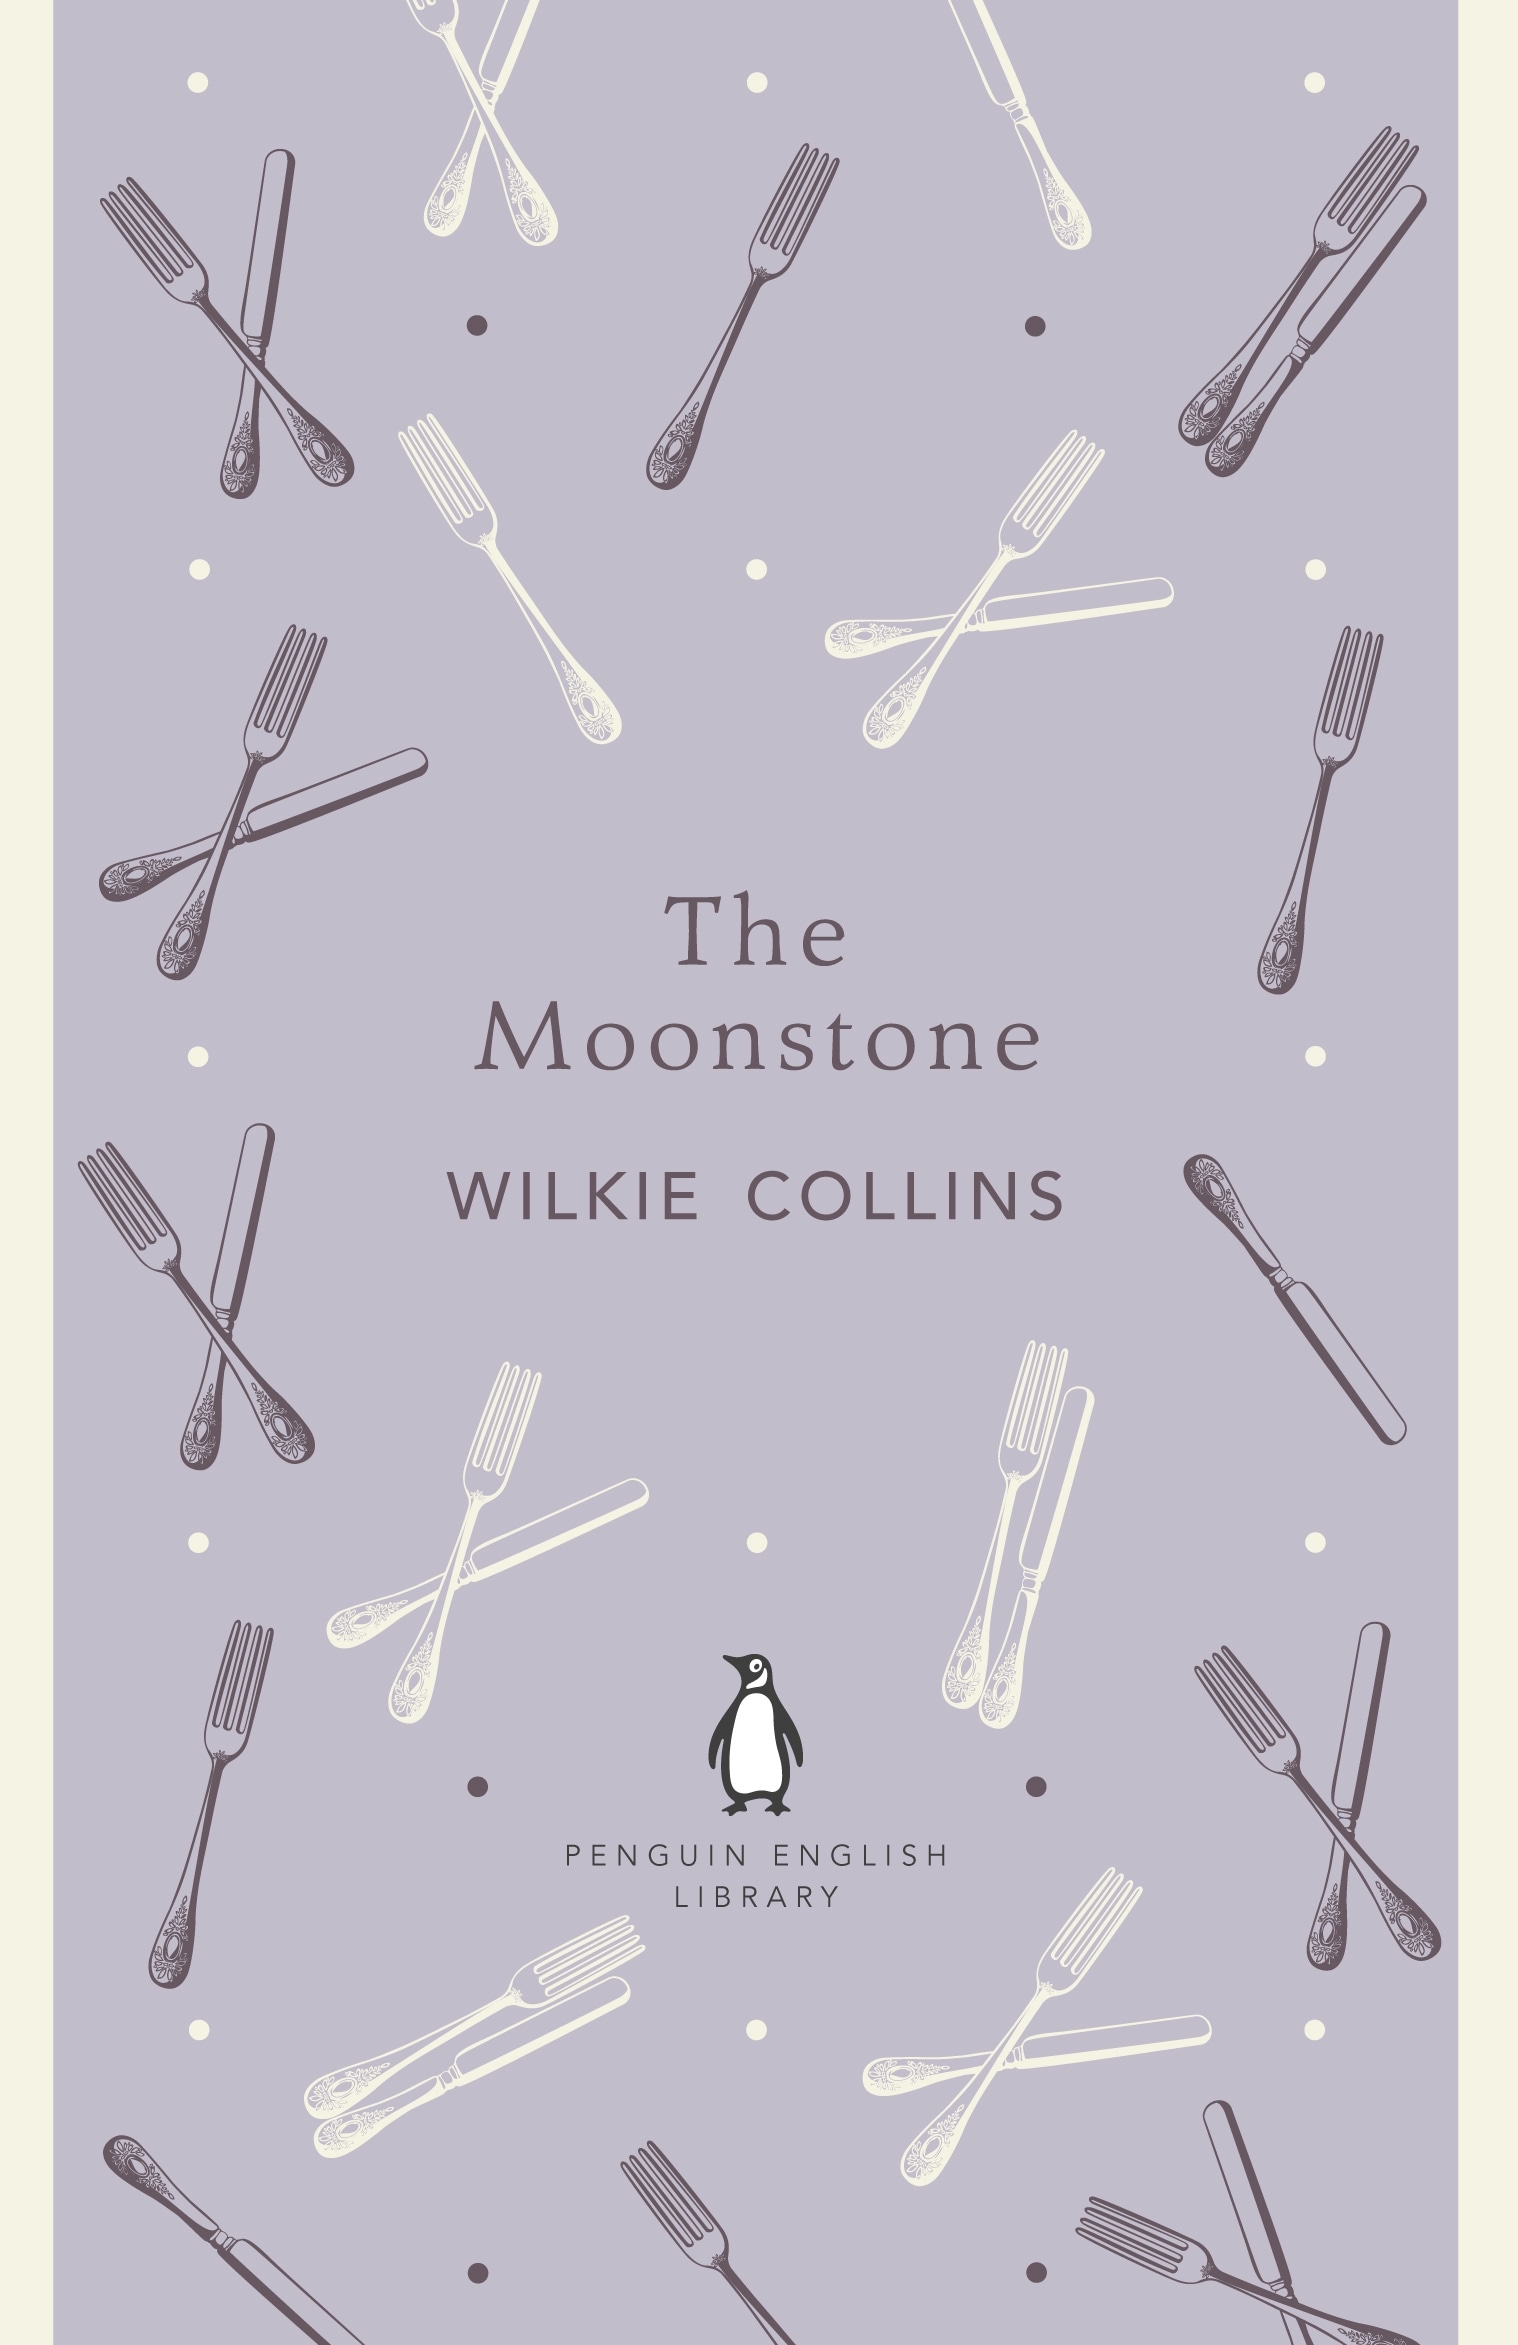 Book “The Moonstone” by Wilkie Collins — April 26, 2012